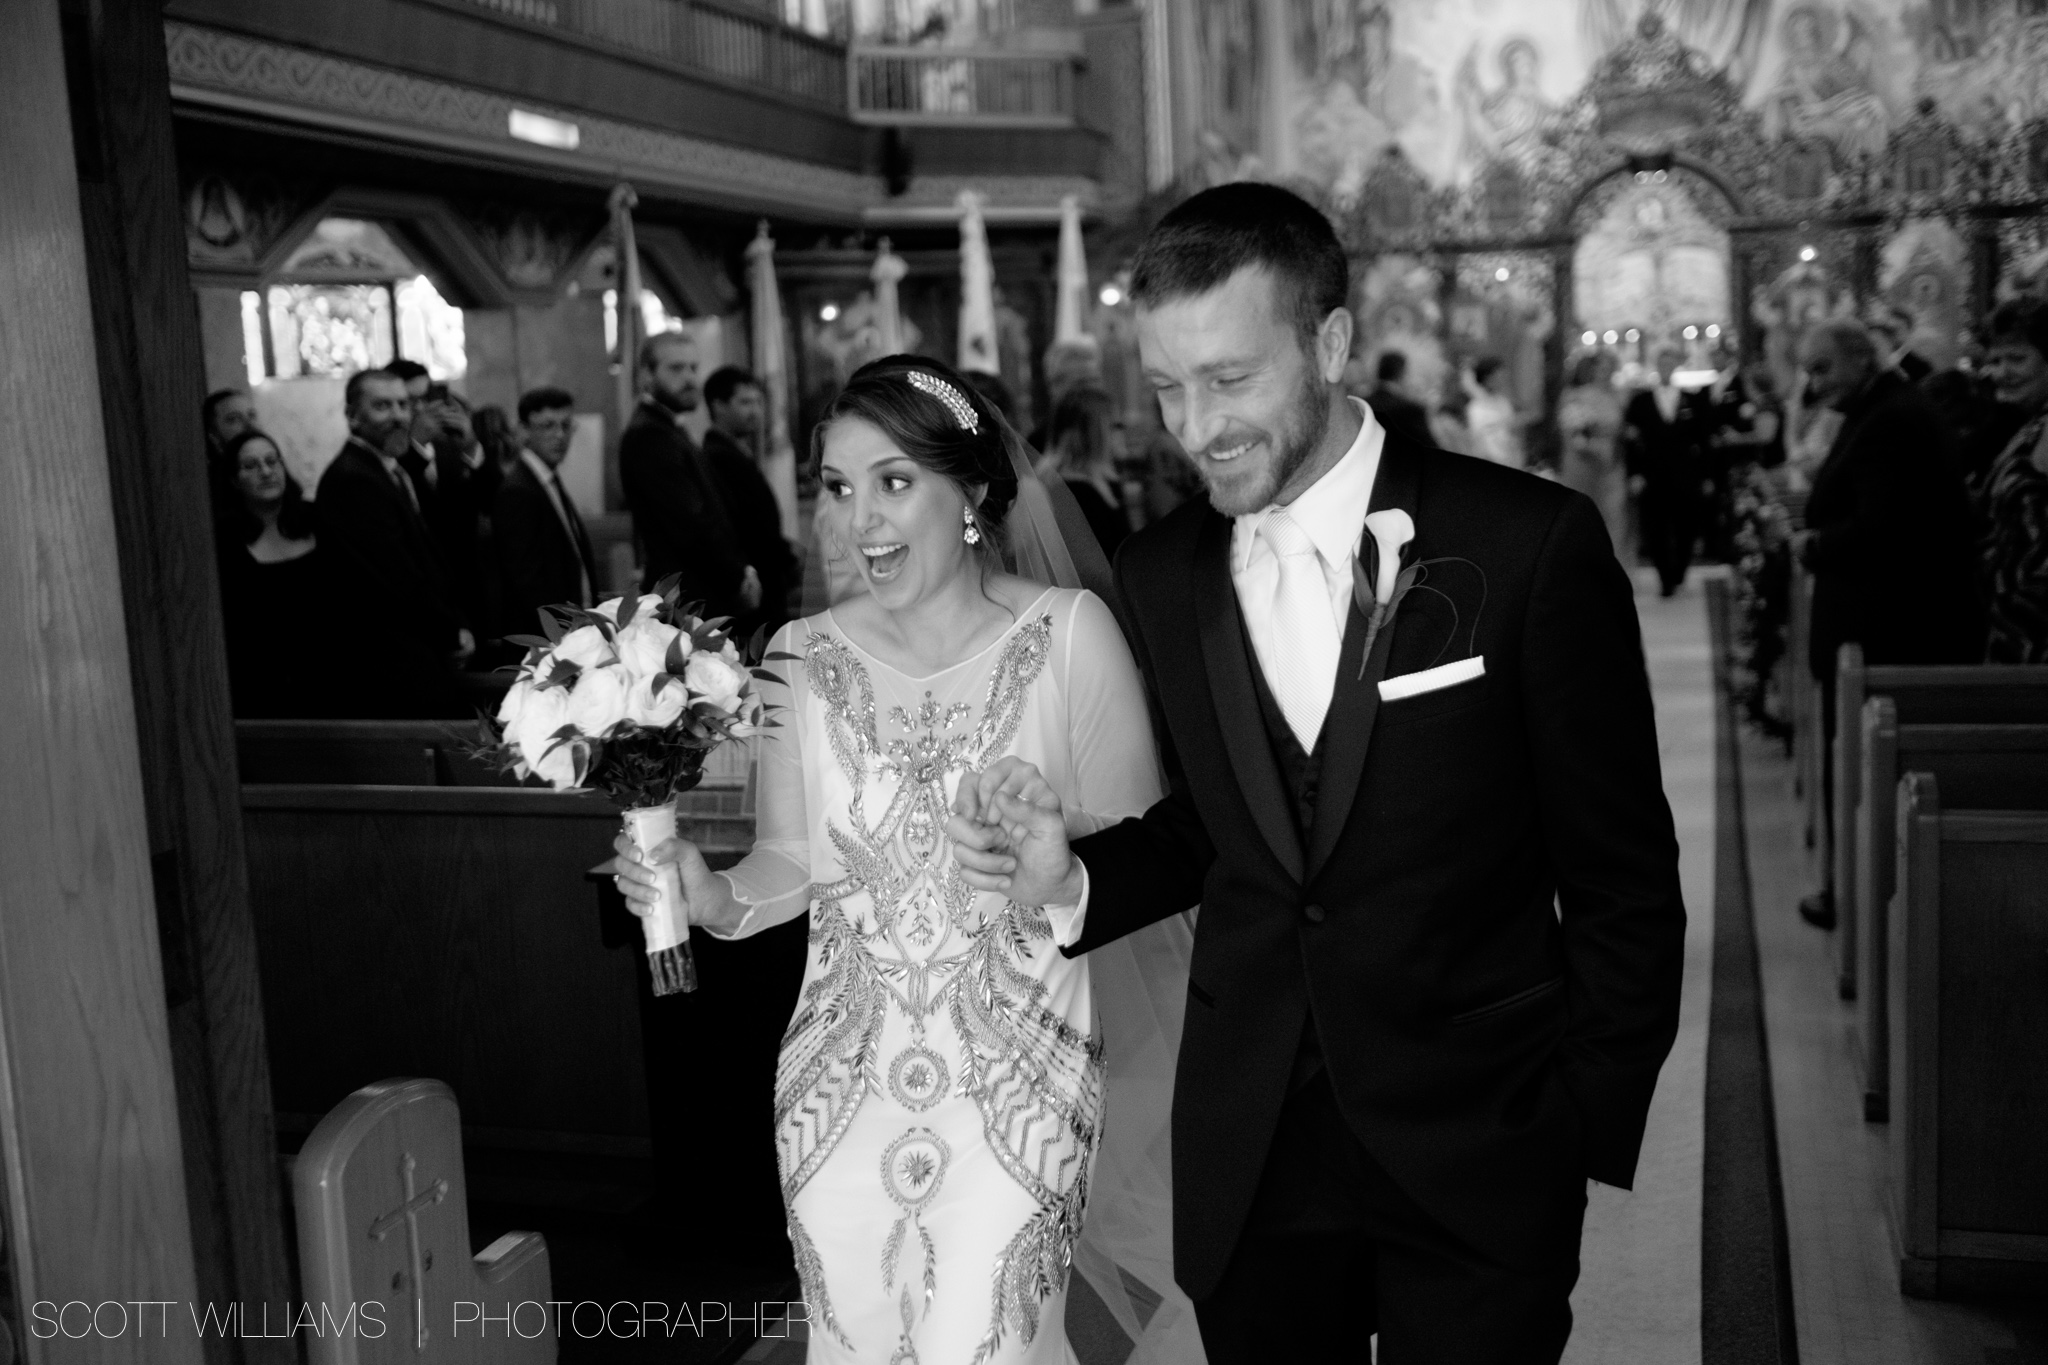  Christina and Tim are all smiles after walking down the aisle as husband and wife after their Ukrainian wedding ceremony in Toronto. 